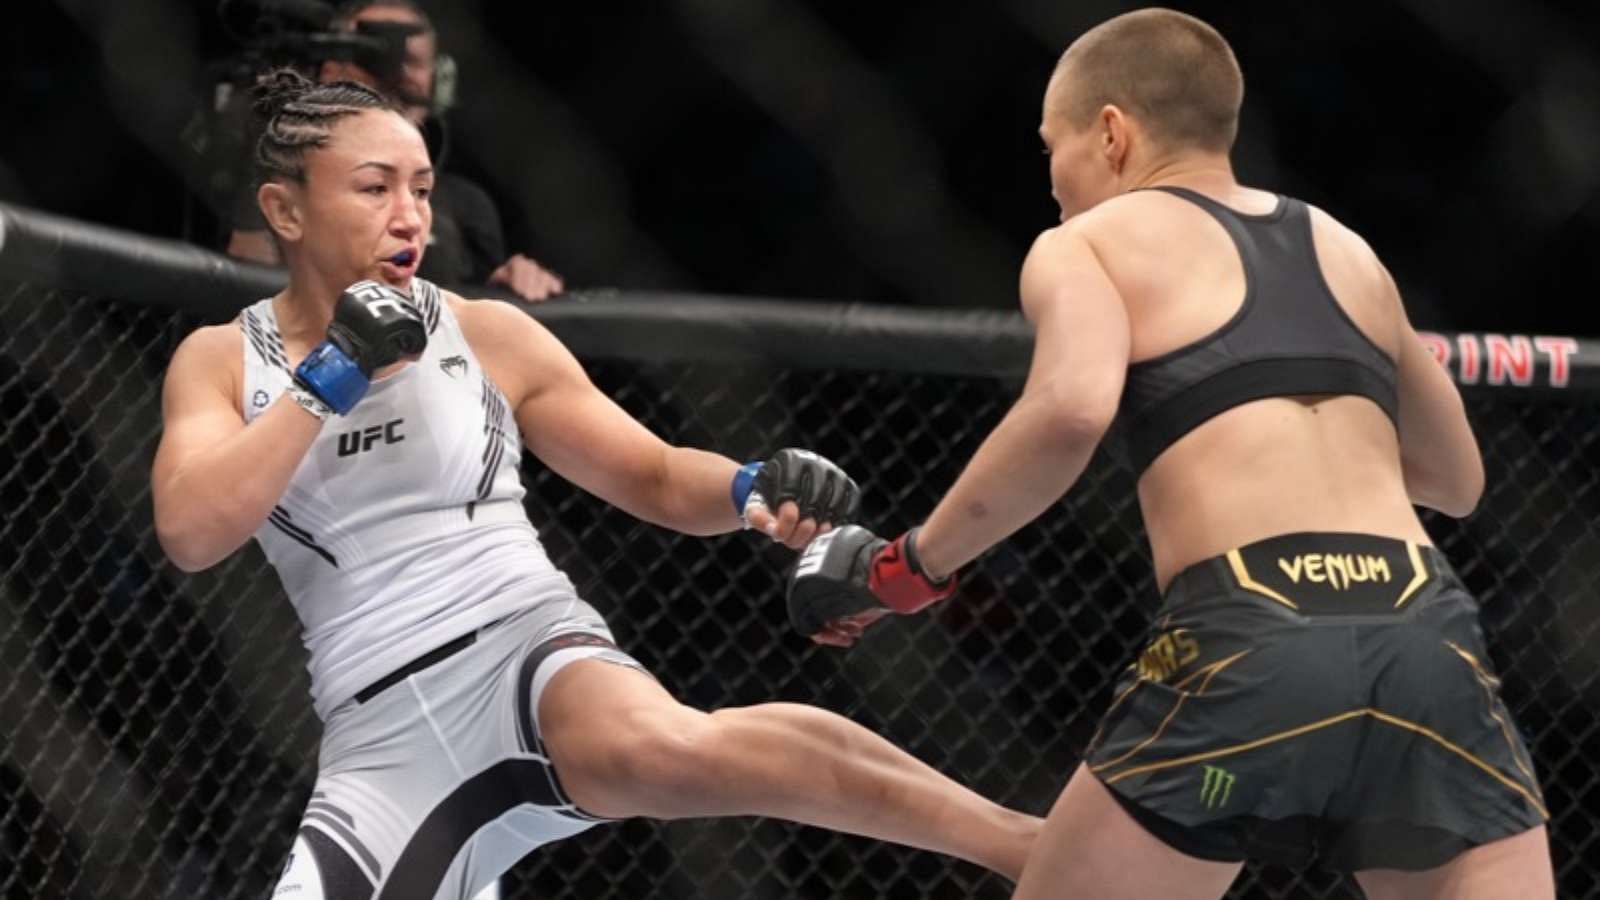 Neither Carla Esparza nor Rose Namajunas looked like a winner after their dull fight